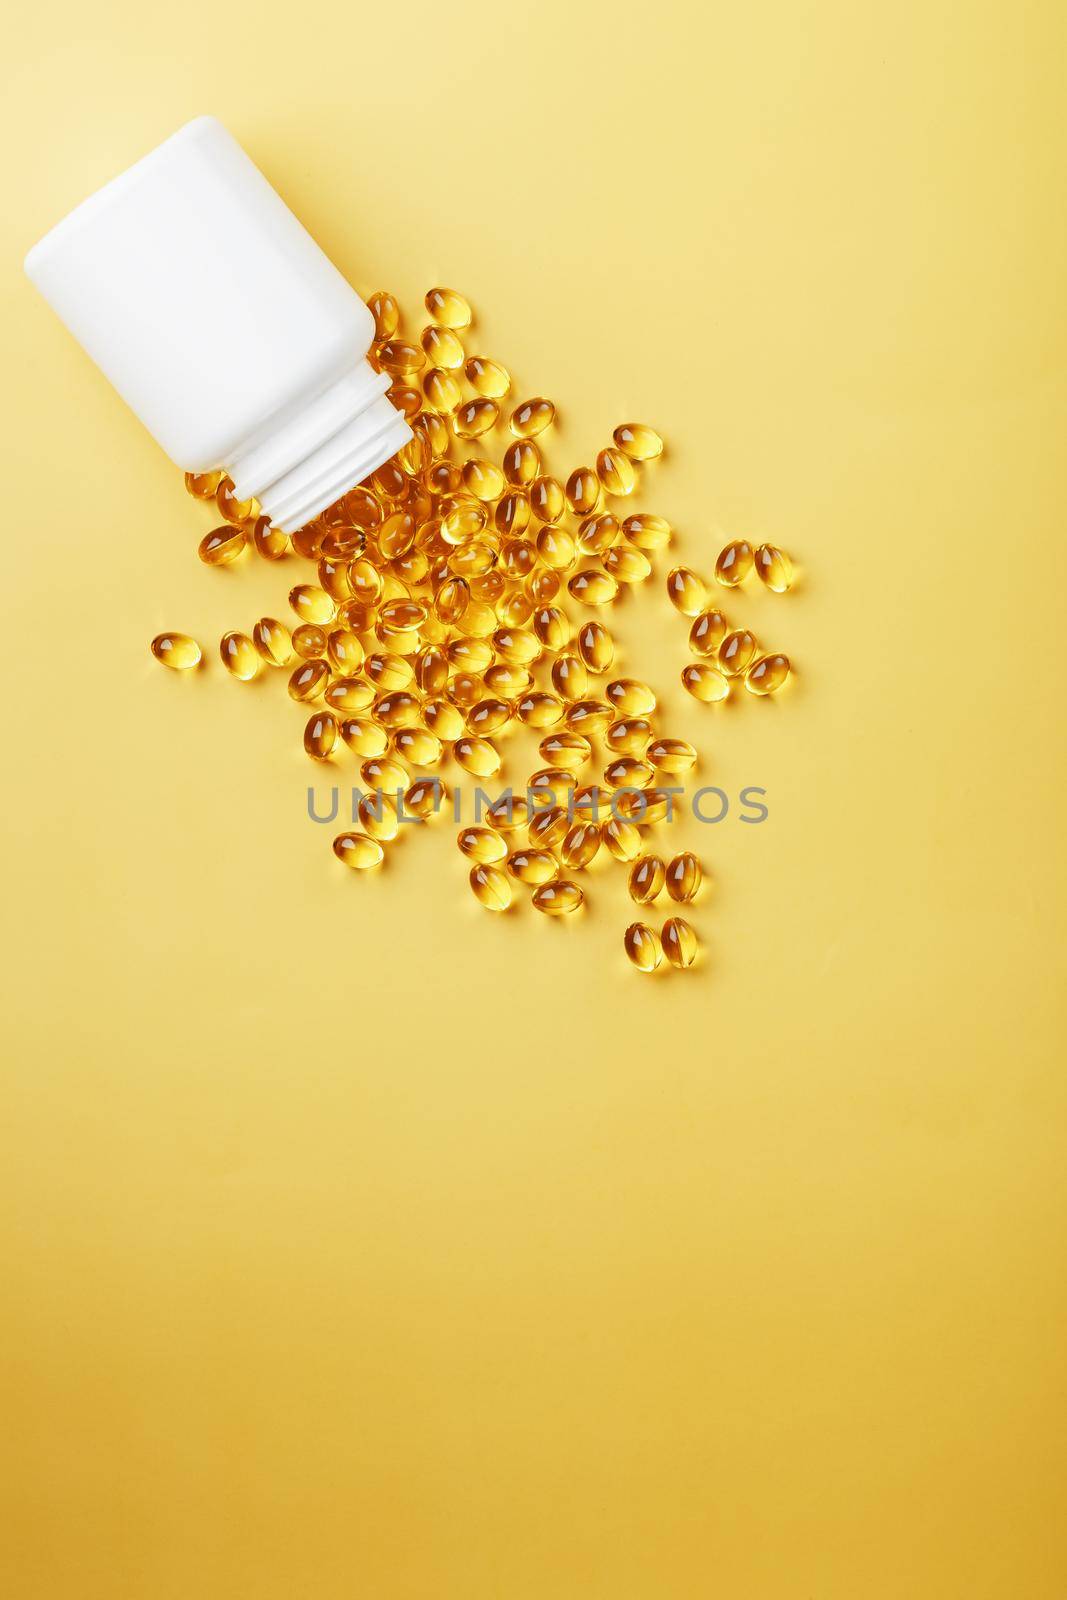 Golden Omega-3 fish oil capsules poured out of a jar on a yellow background by AlexGrec